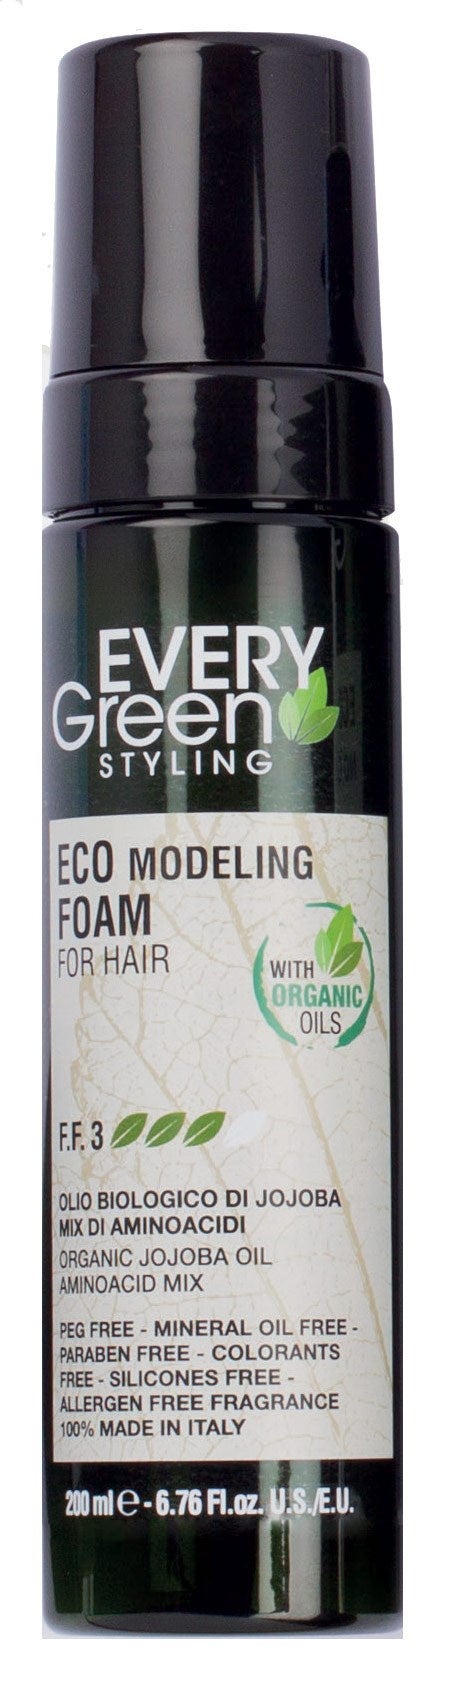 Modeling Foam For Hair by Every Green